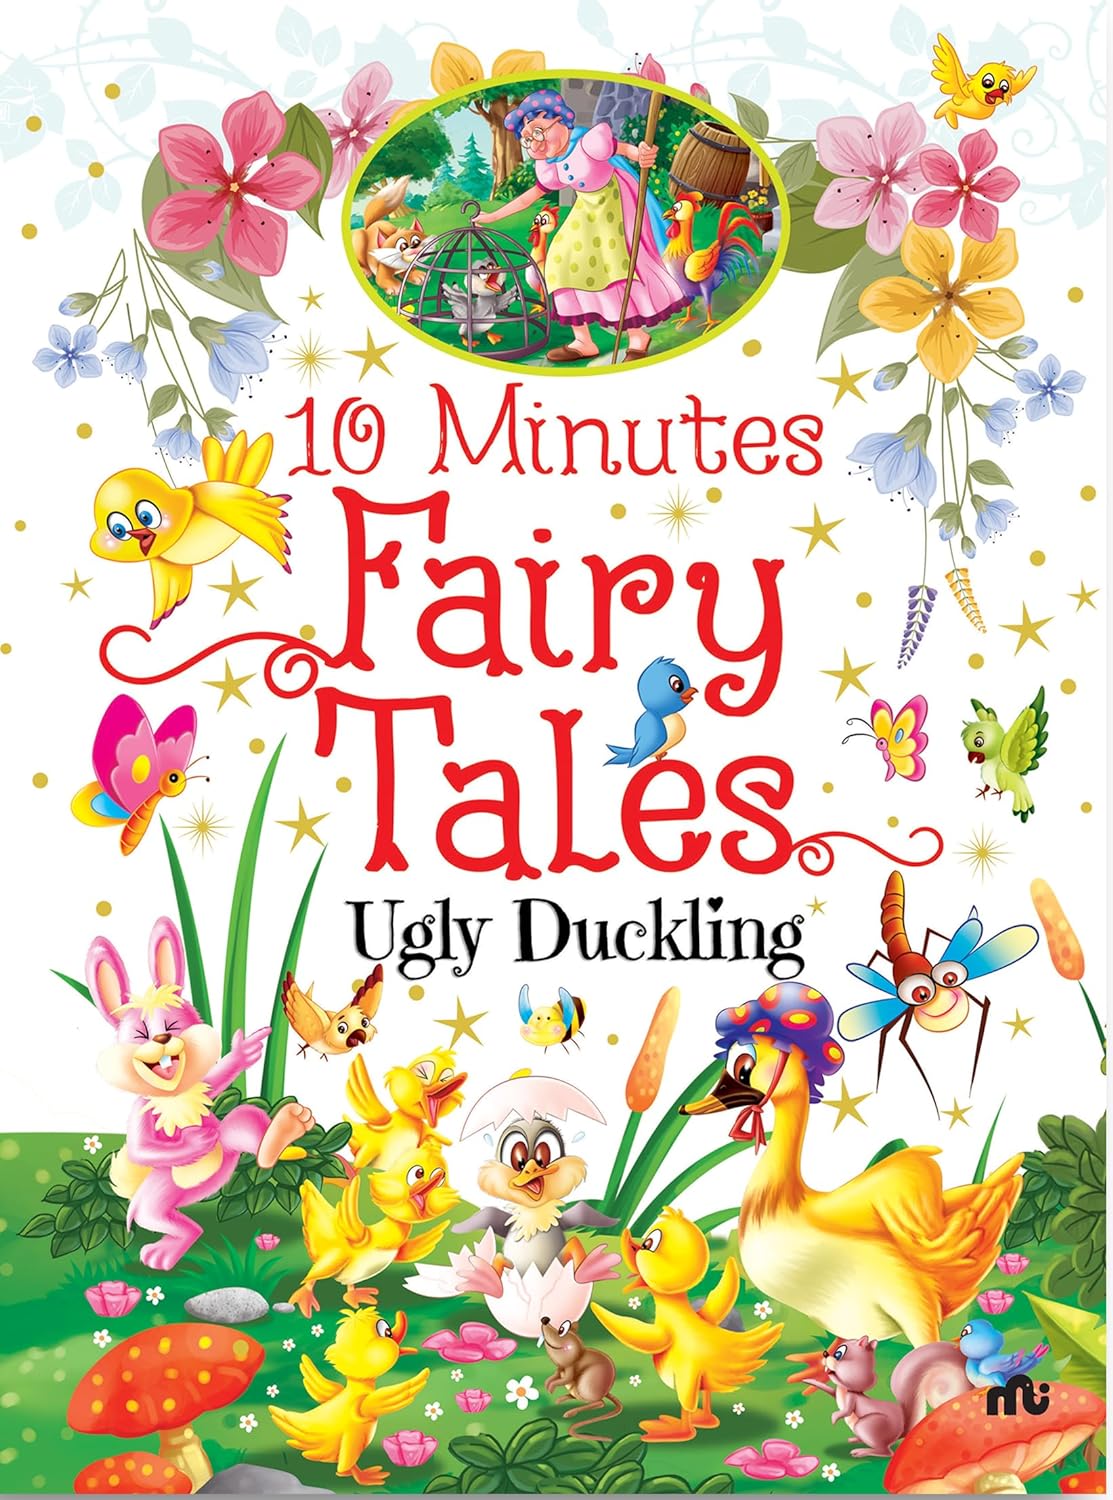 10 Minutes Fairy Tales Ugly Duckling